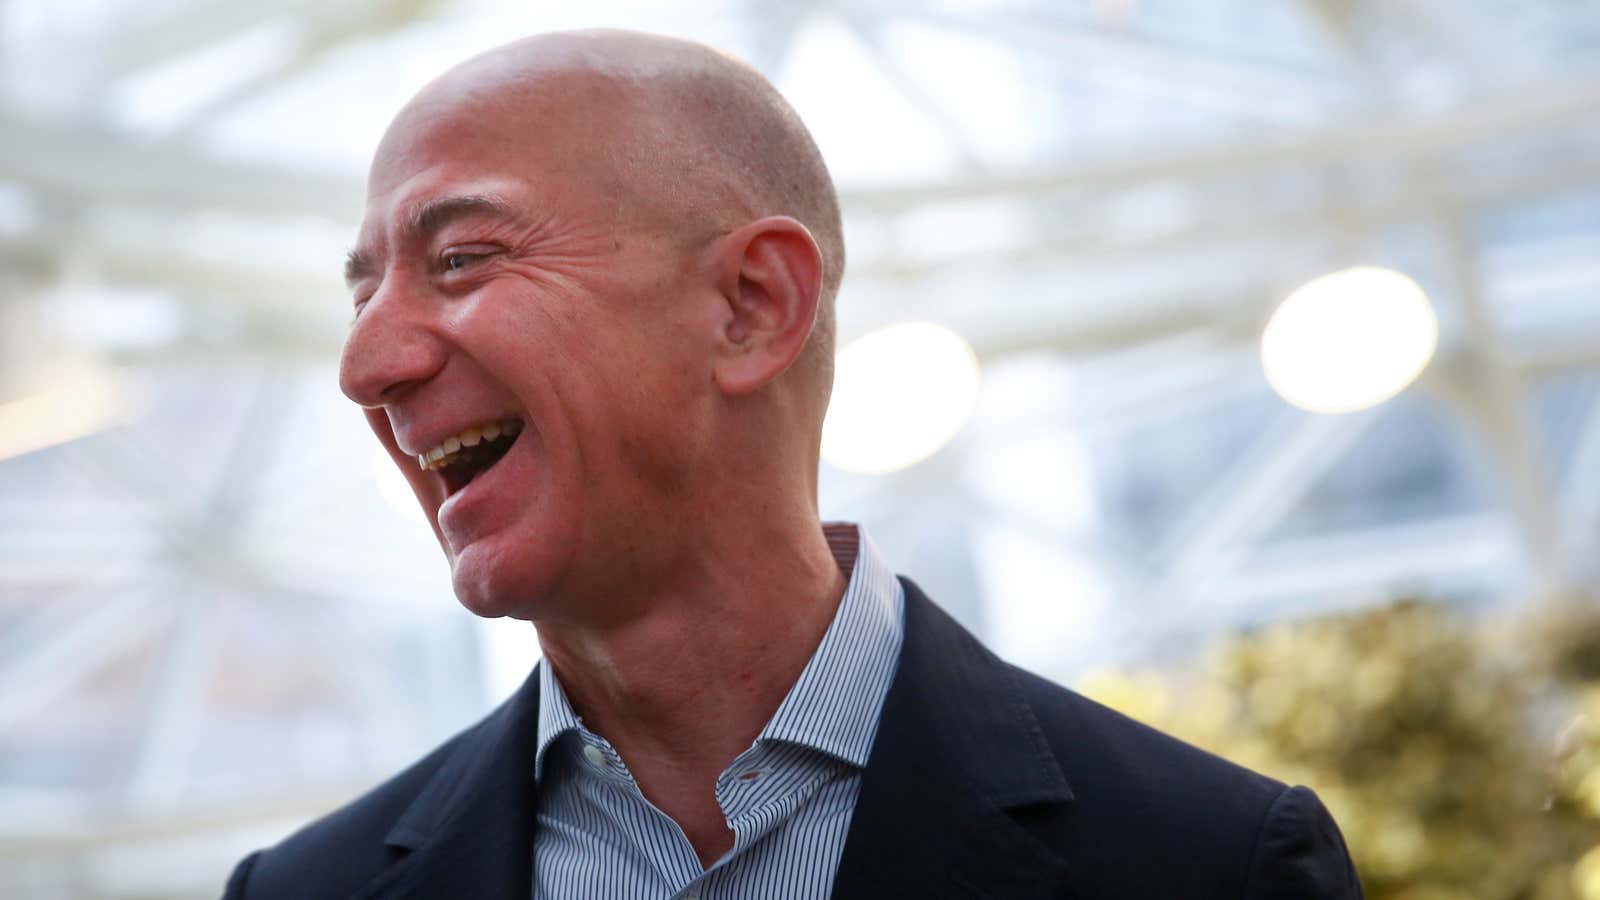 Bringing “the same set of principles that have driven Amazon” to philanthropy.